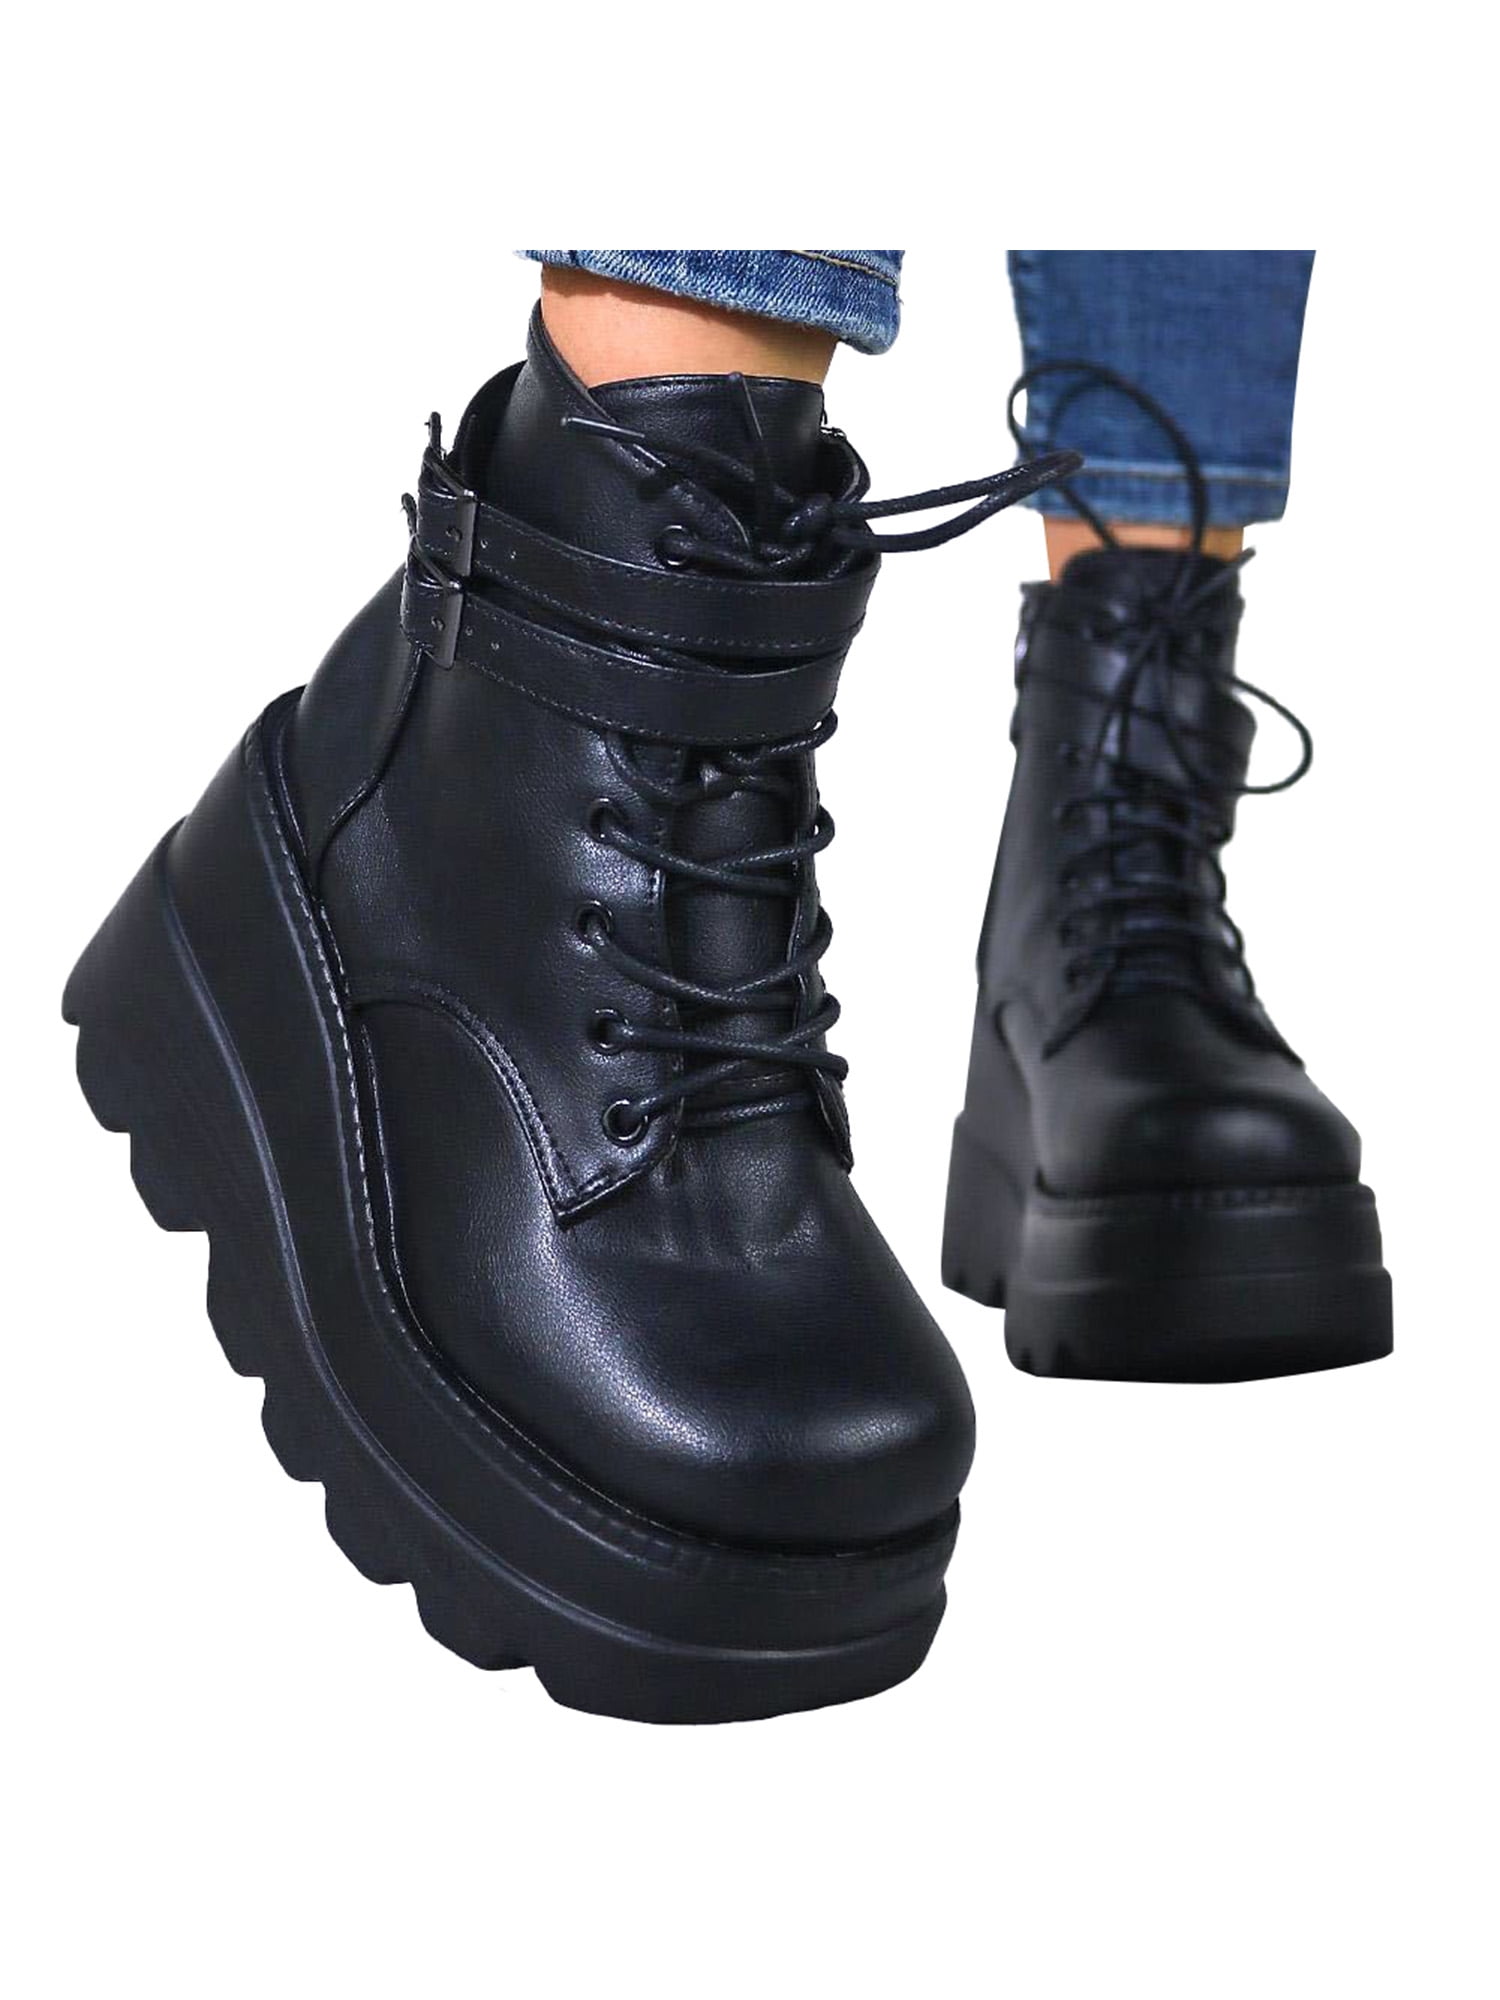 Women Leather Round Toe Platform Shoes Elastic High Wedge Heel Ankle Boots Punk